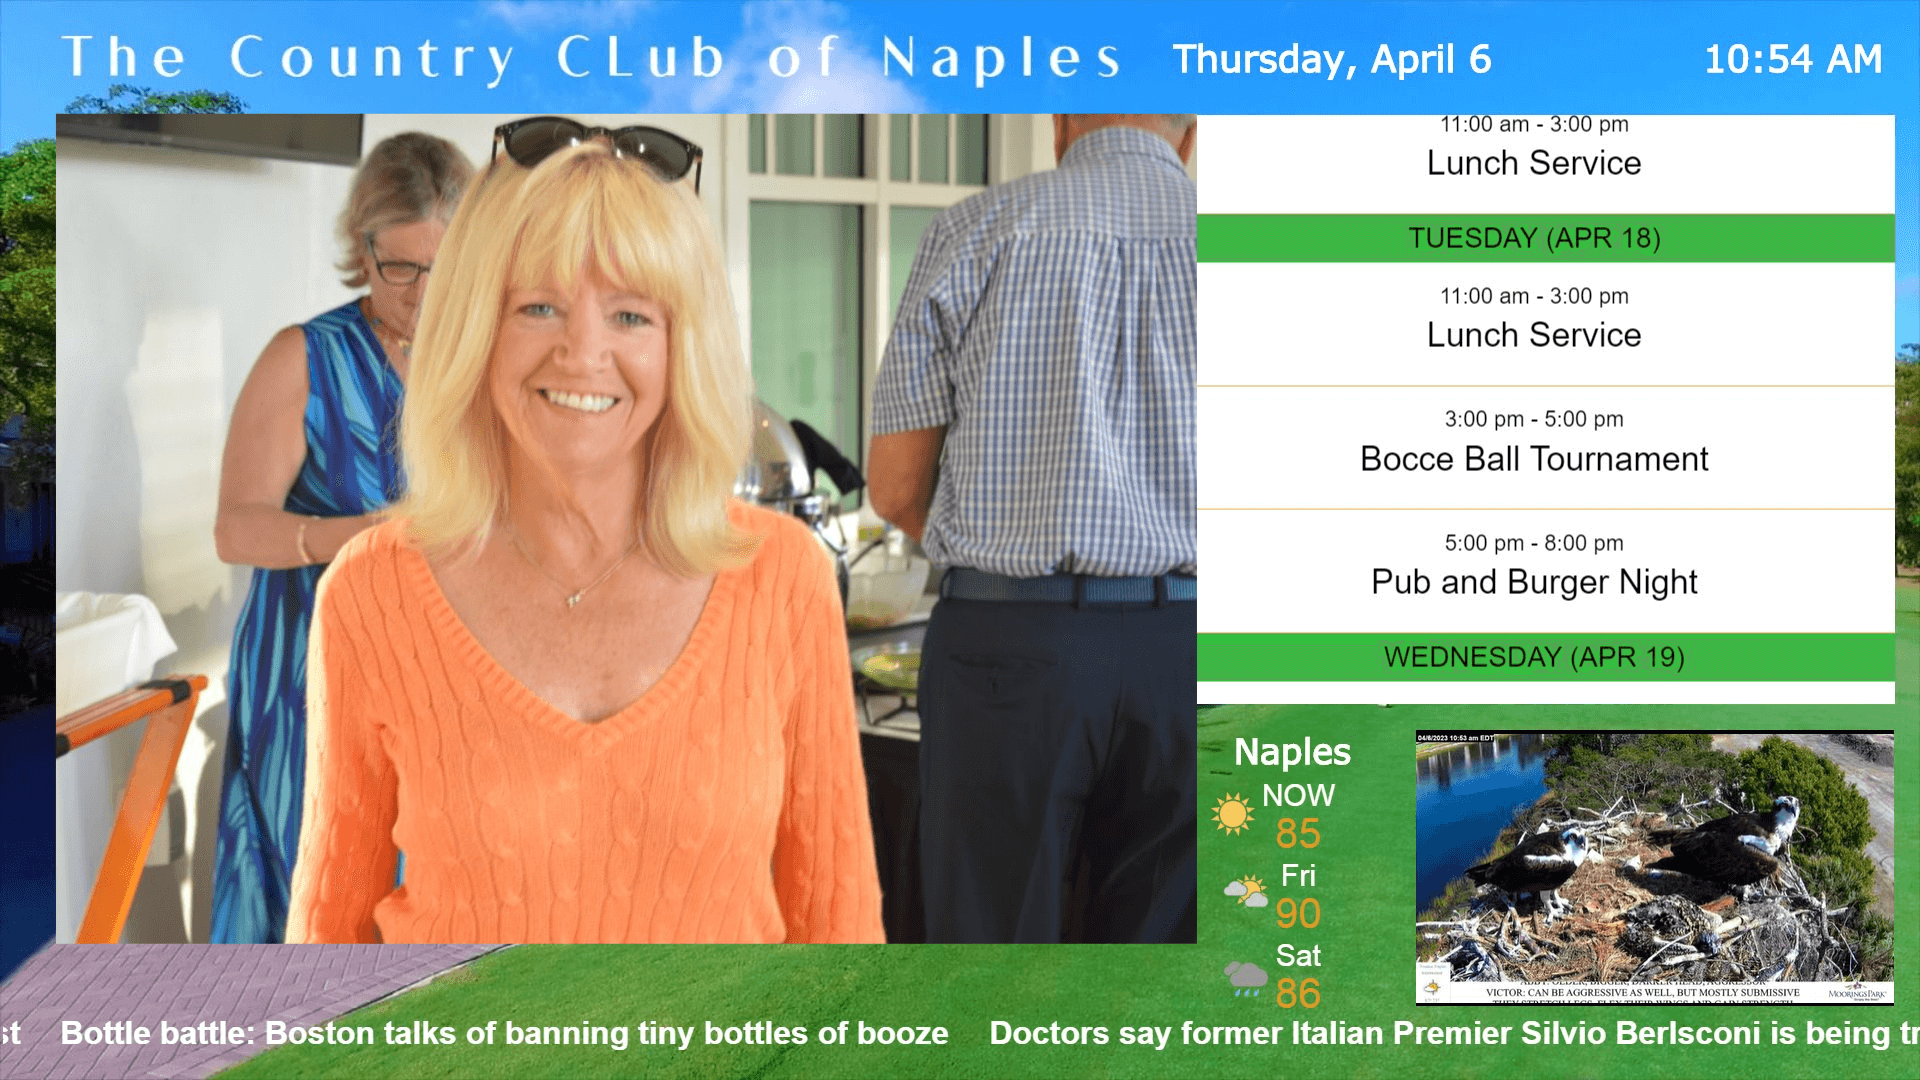 The image shows a digital signage layout for The Country Club of Naples displaying the local time, current date, 3-day weather, a schedule of events, a live stream of an osprey nest on the course, and an announcement space to share video, pictures and news happening at the club.